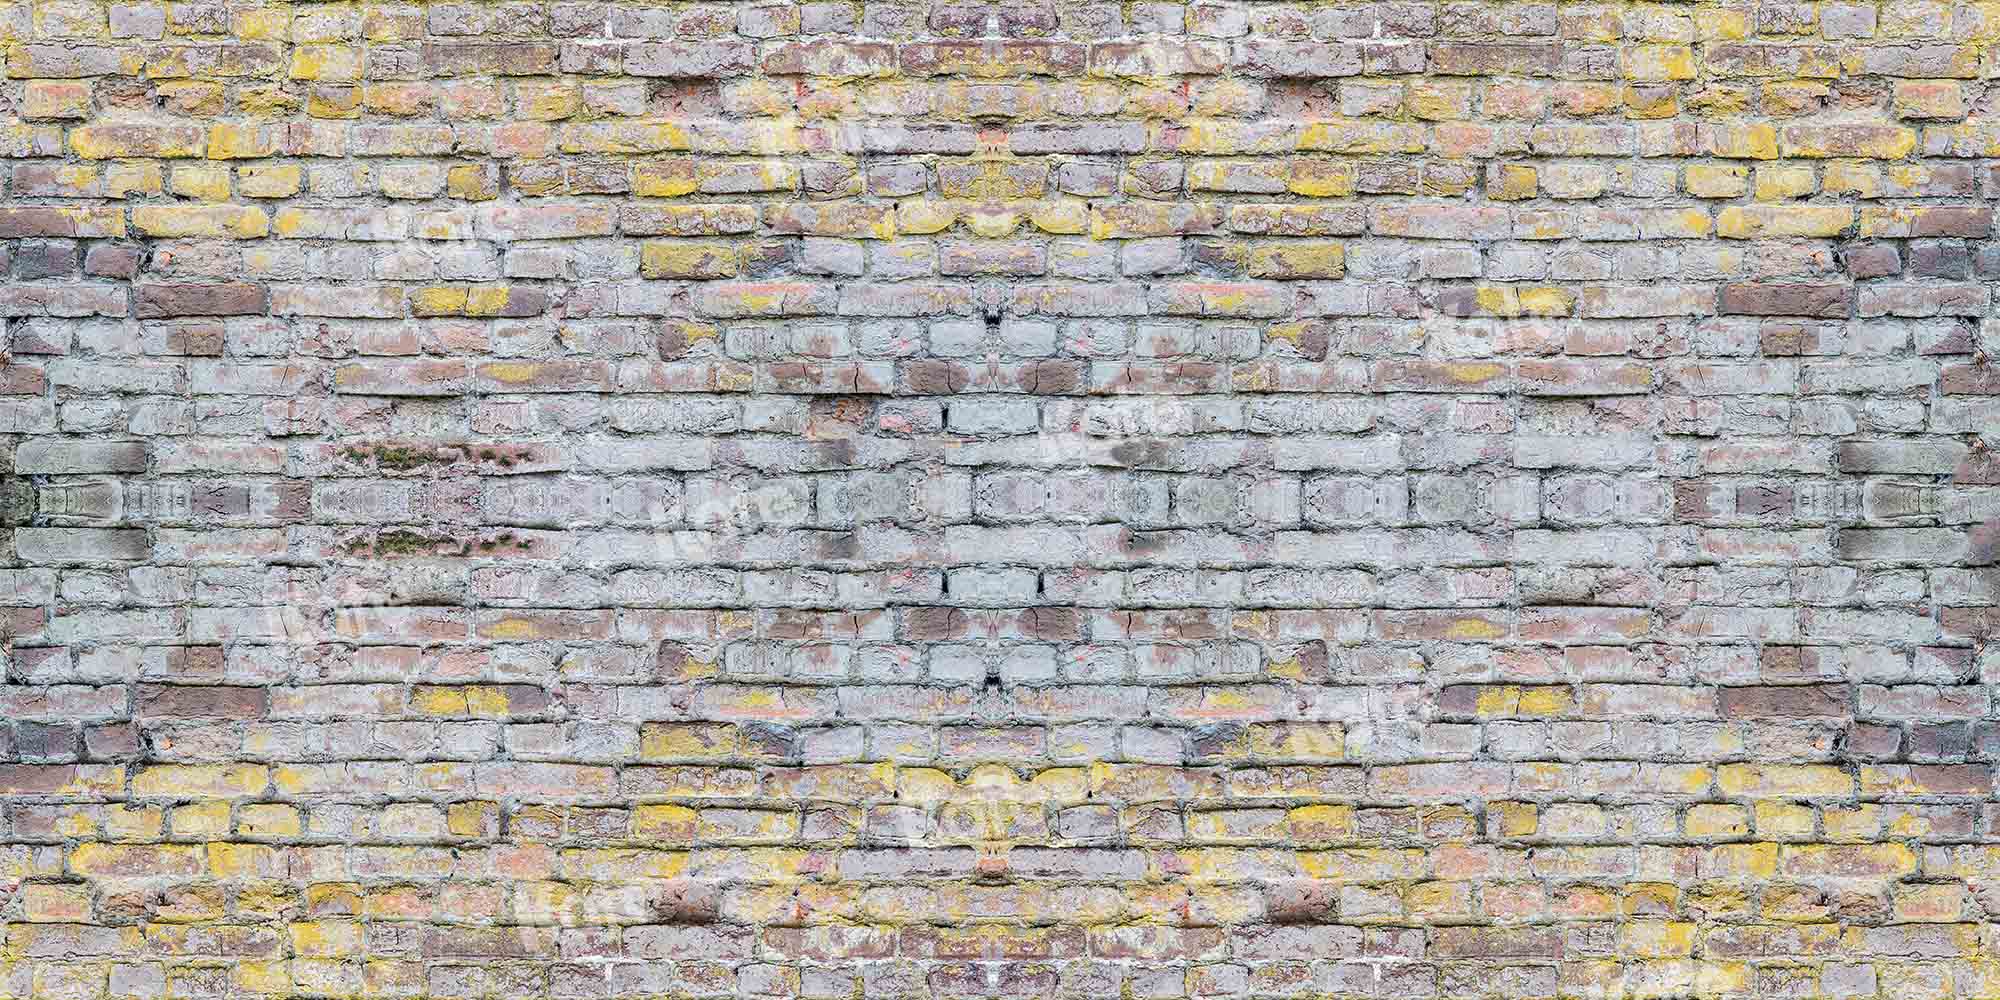 Kate Retro Old Brick Wall Background for Photography Designed by Chain Photography